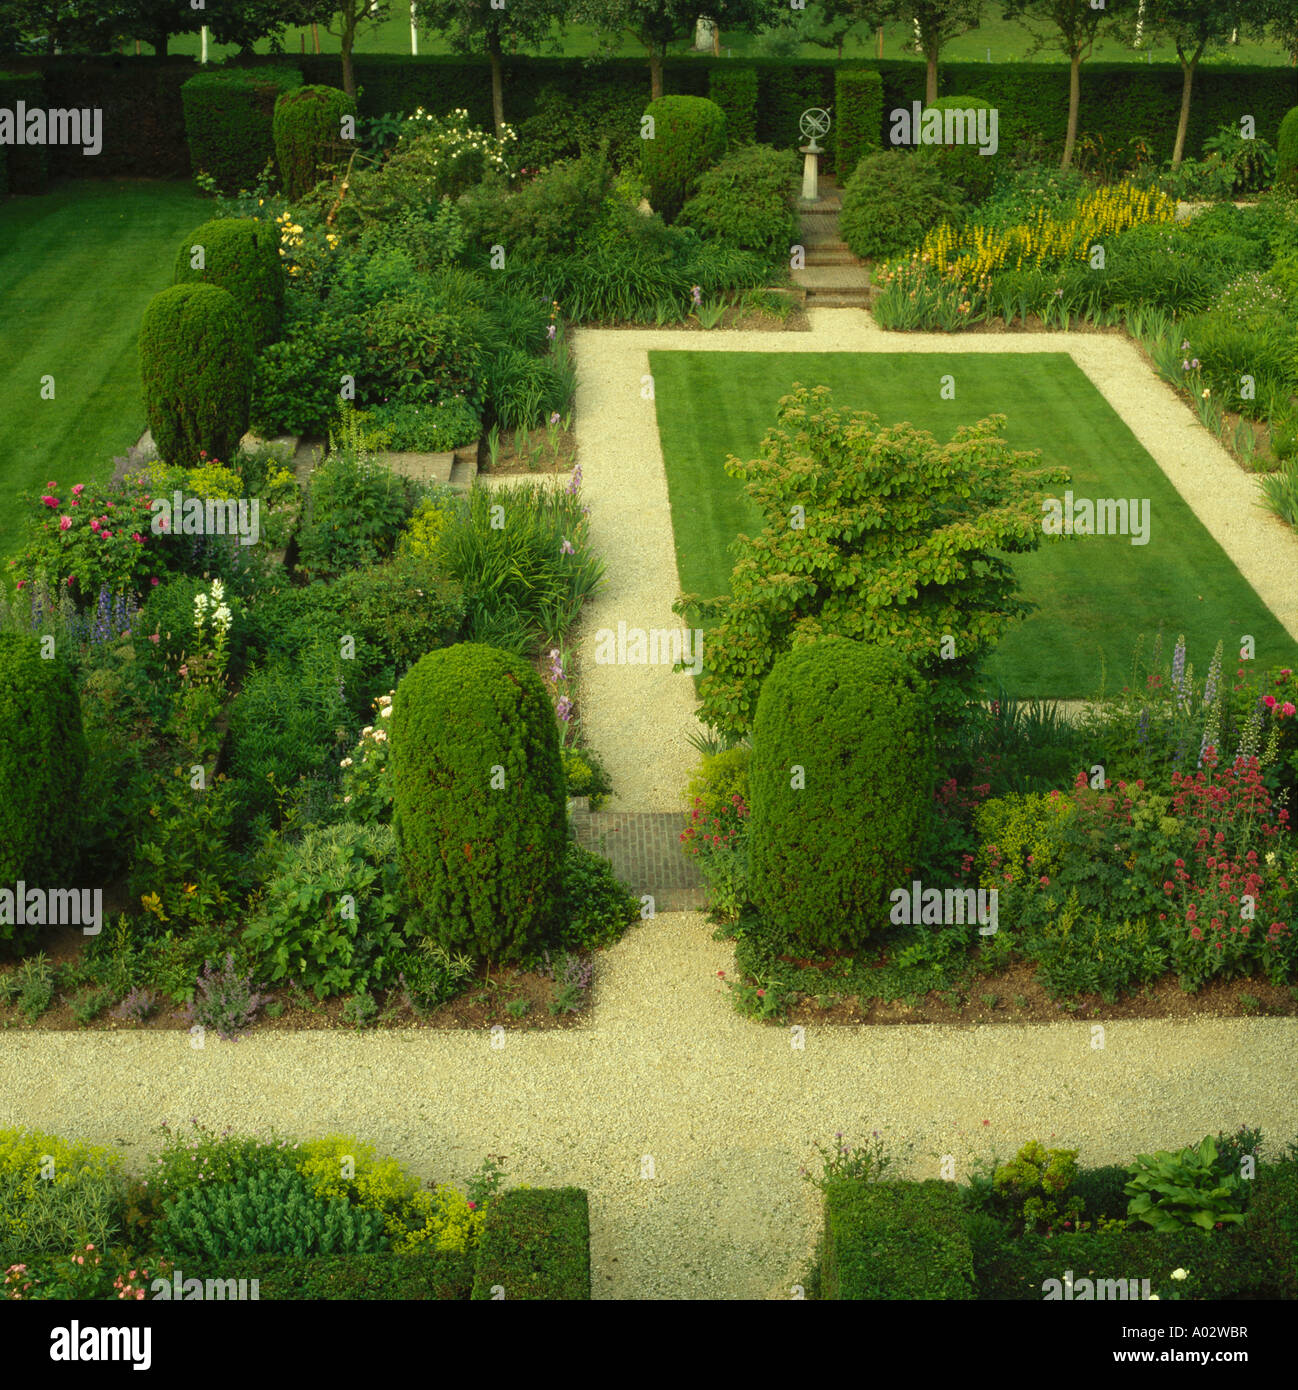 Aerial view of small rectangular lawn with gravel paths edged with mixed borders with structure Stock Photo